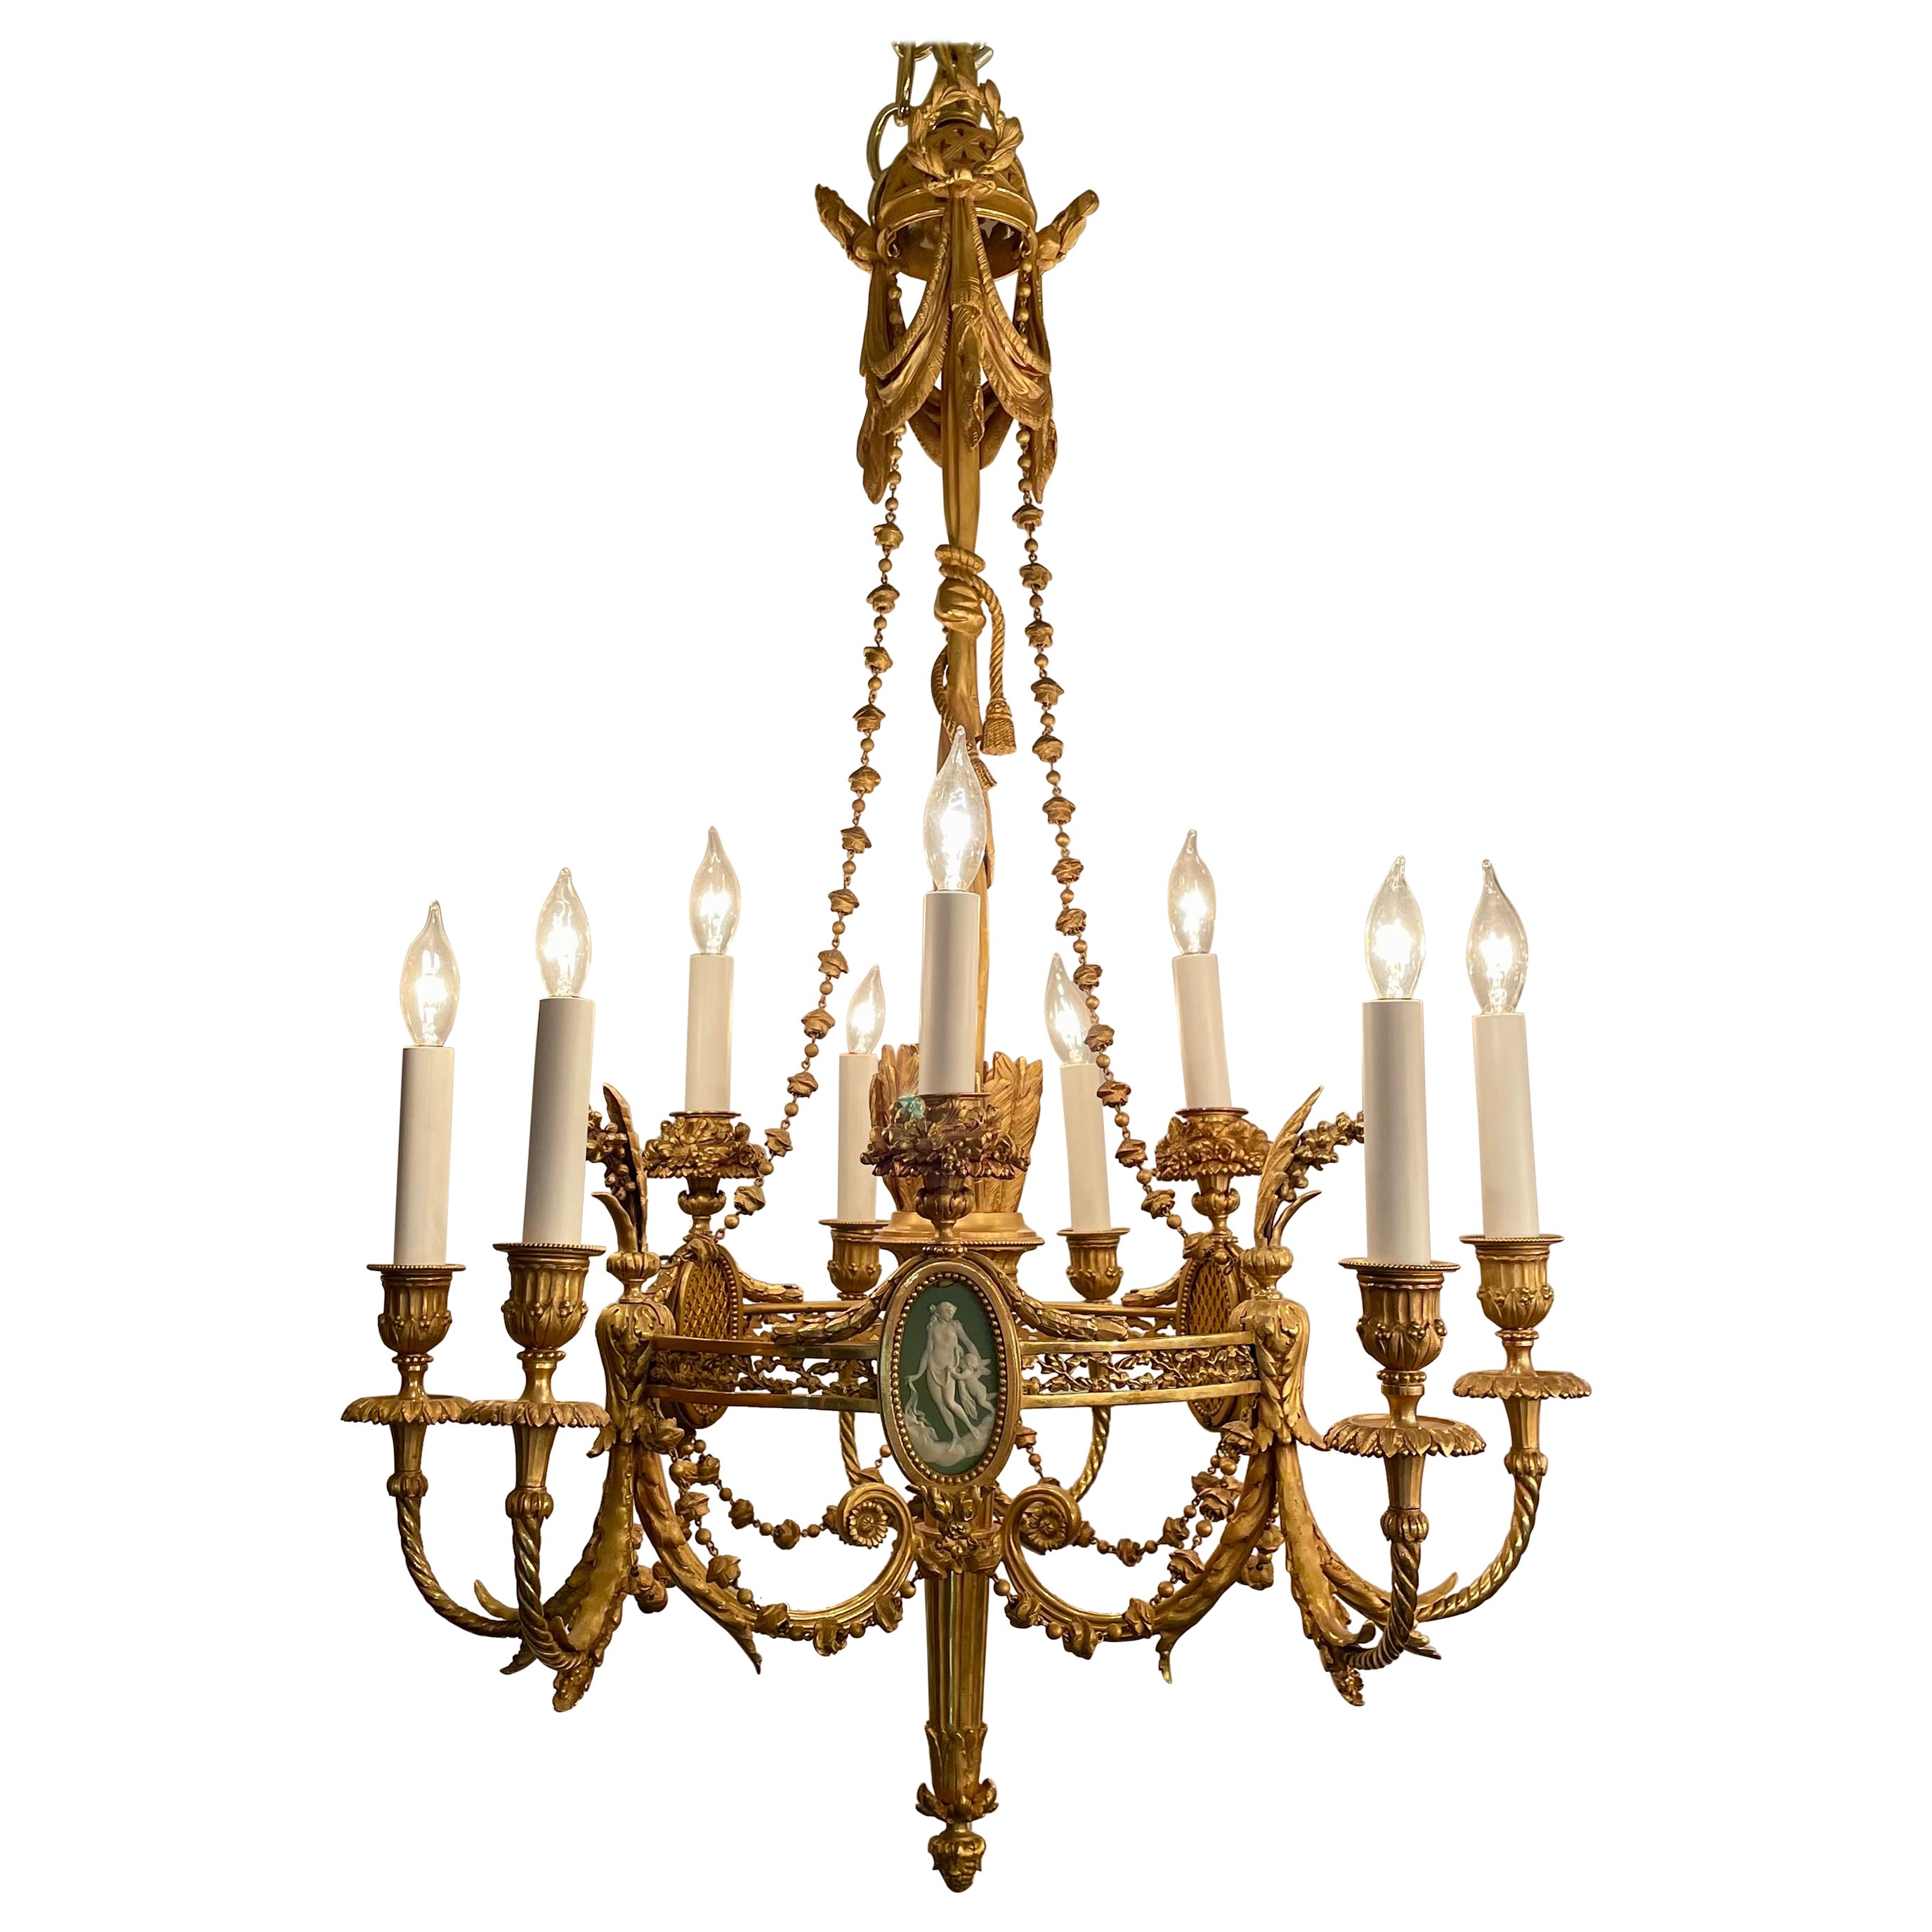 Antique French Louis XVI Gold Bronze Chandelier with Wedgwood Mounts, Circa 1880